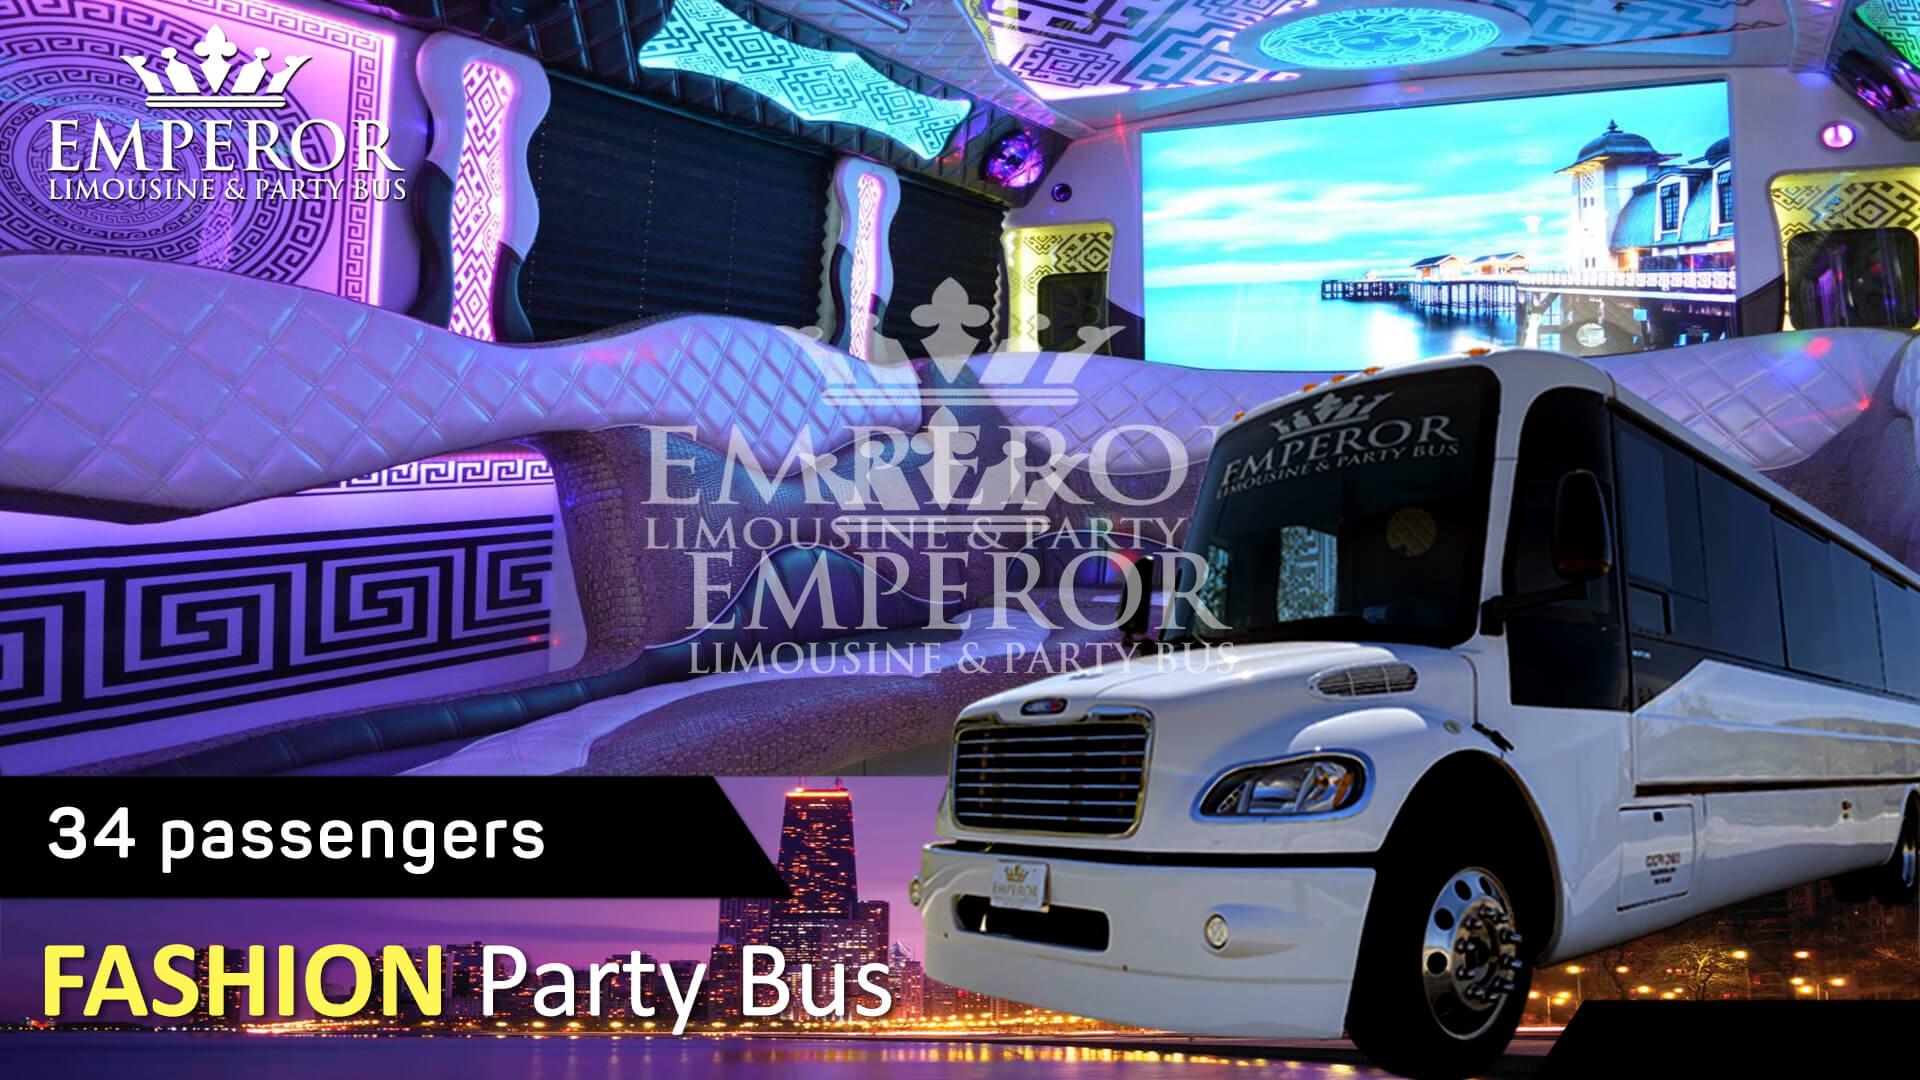 Corporate party bus service - Fashion edition